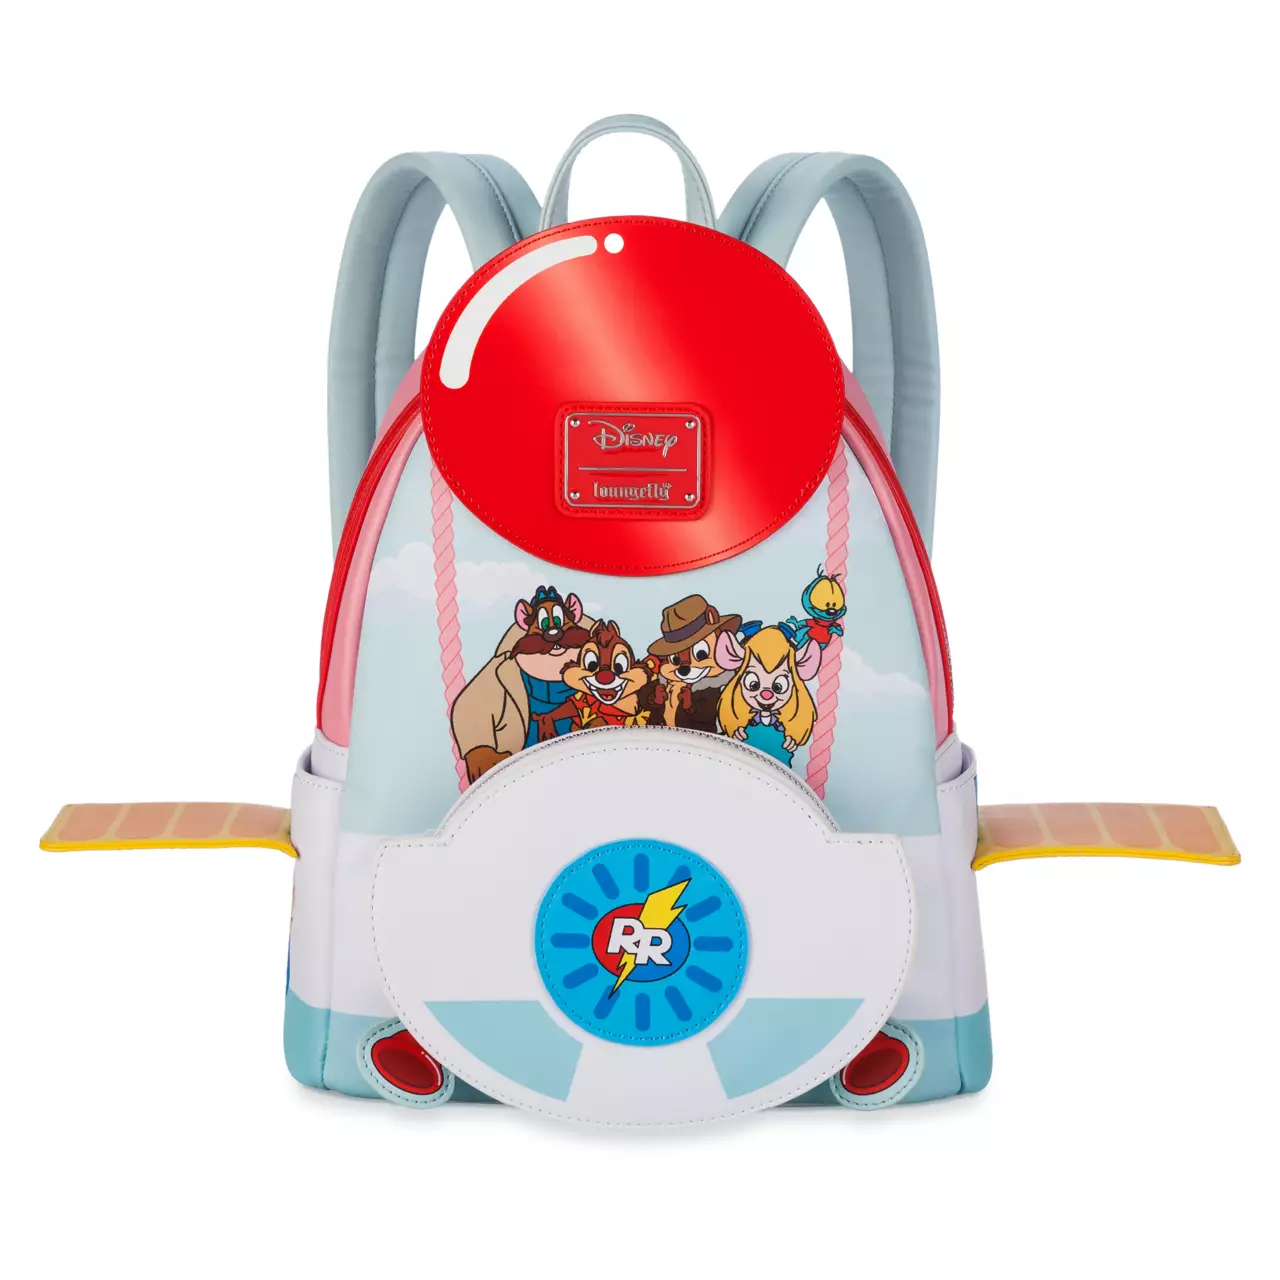 Chip 'n Dale's Rescue Rangers Loungefly Mini Backpack